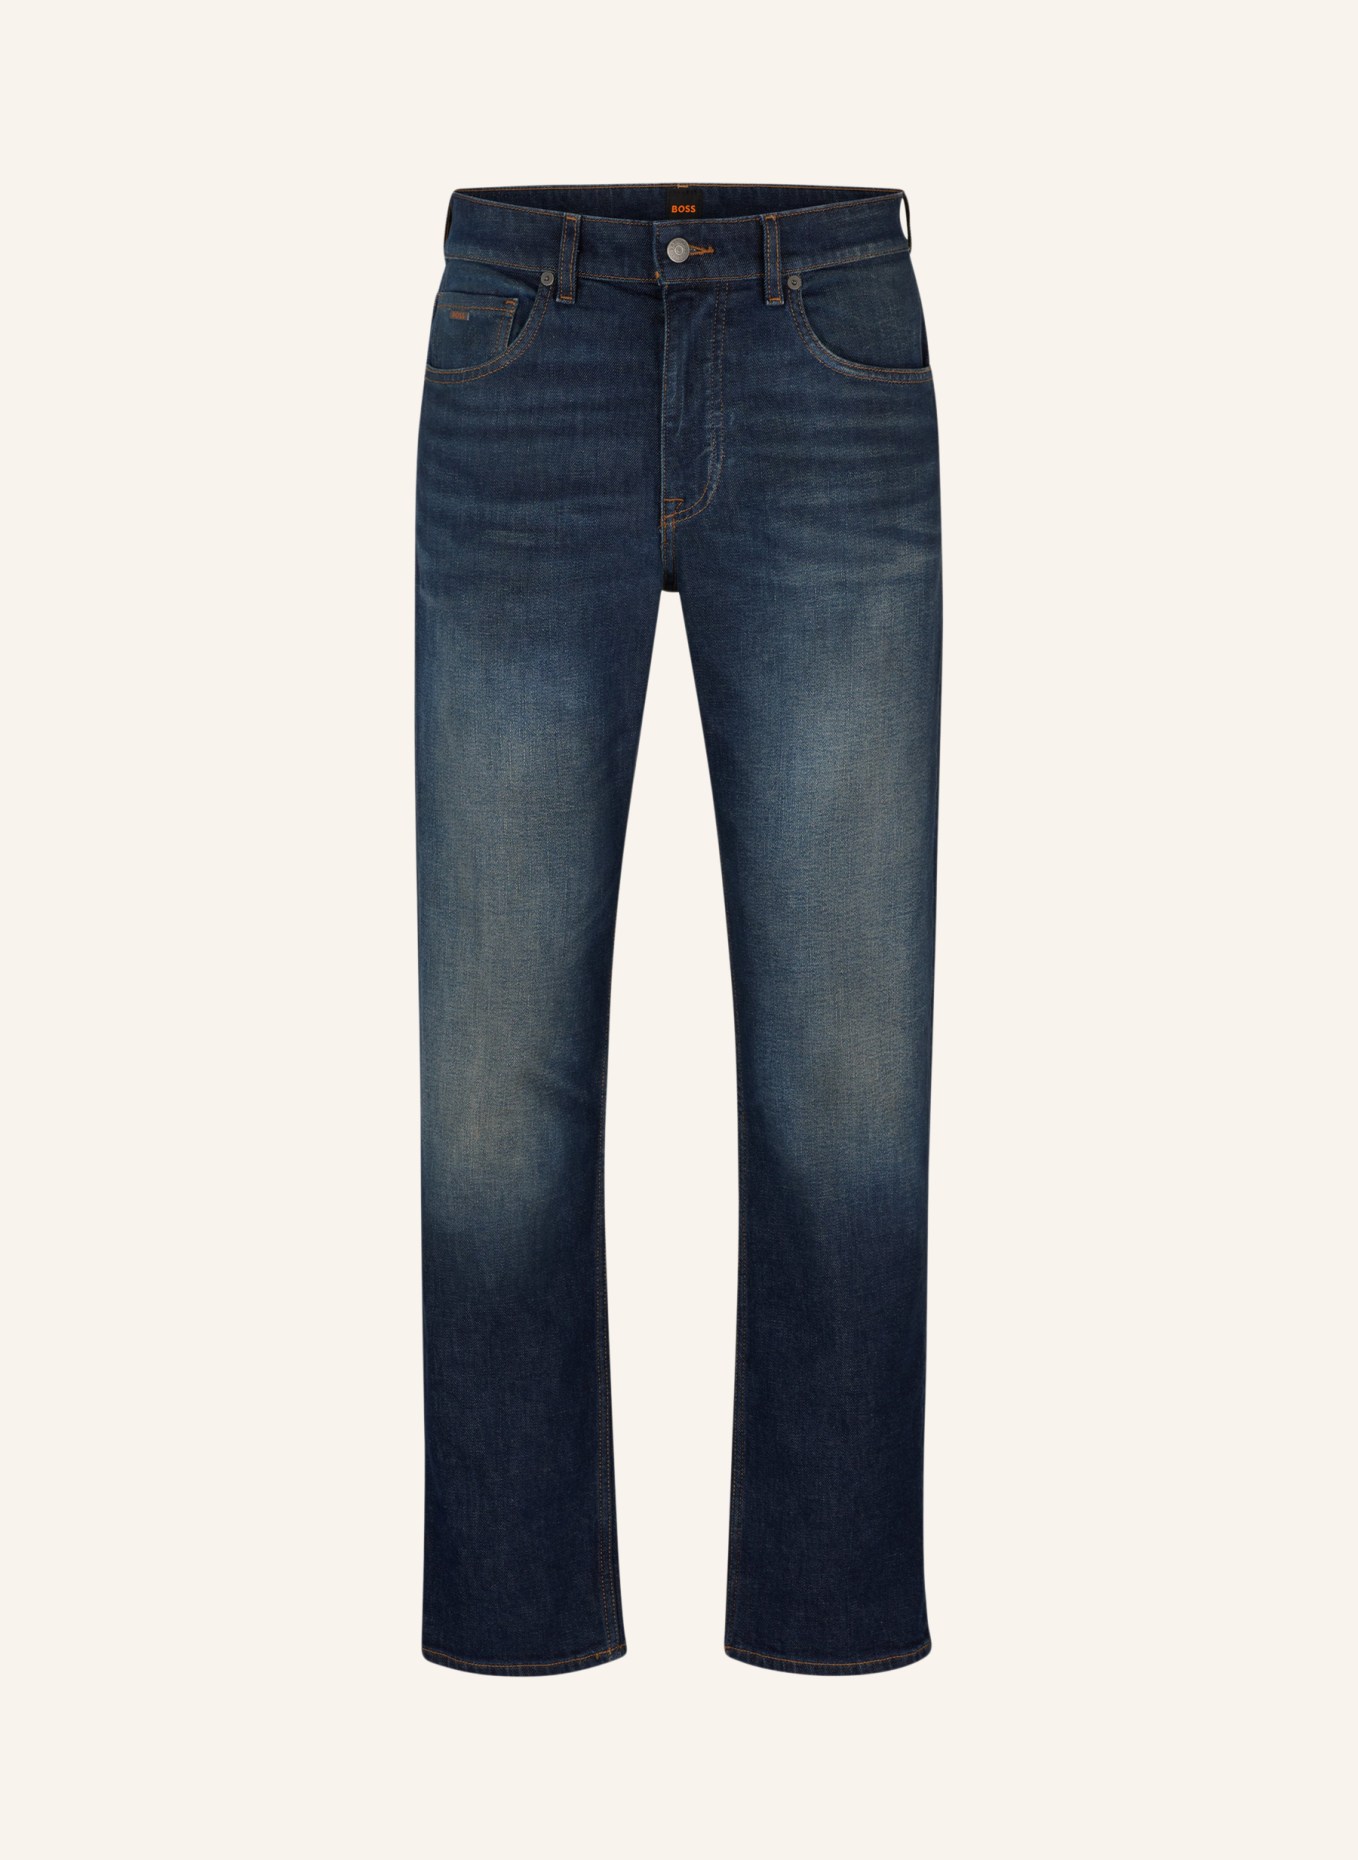 BOSS Jeans ANDERSON BC-C Relaxed Fit, Farbe: DUNKELBLAU (Bild 1)